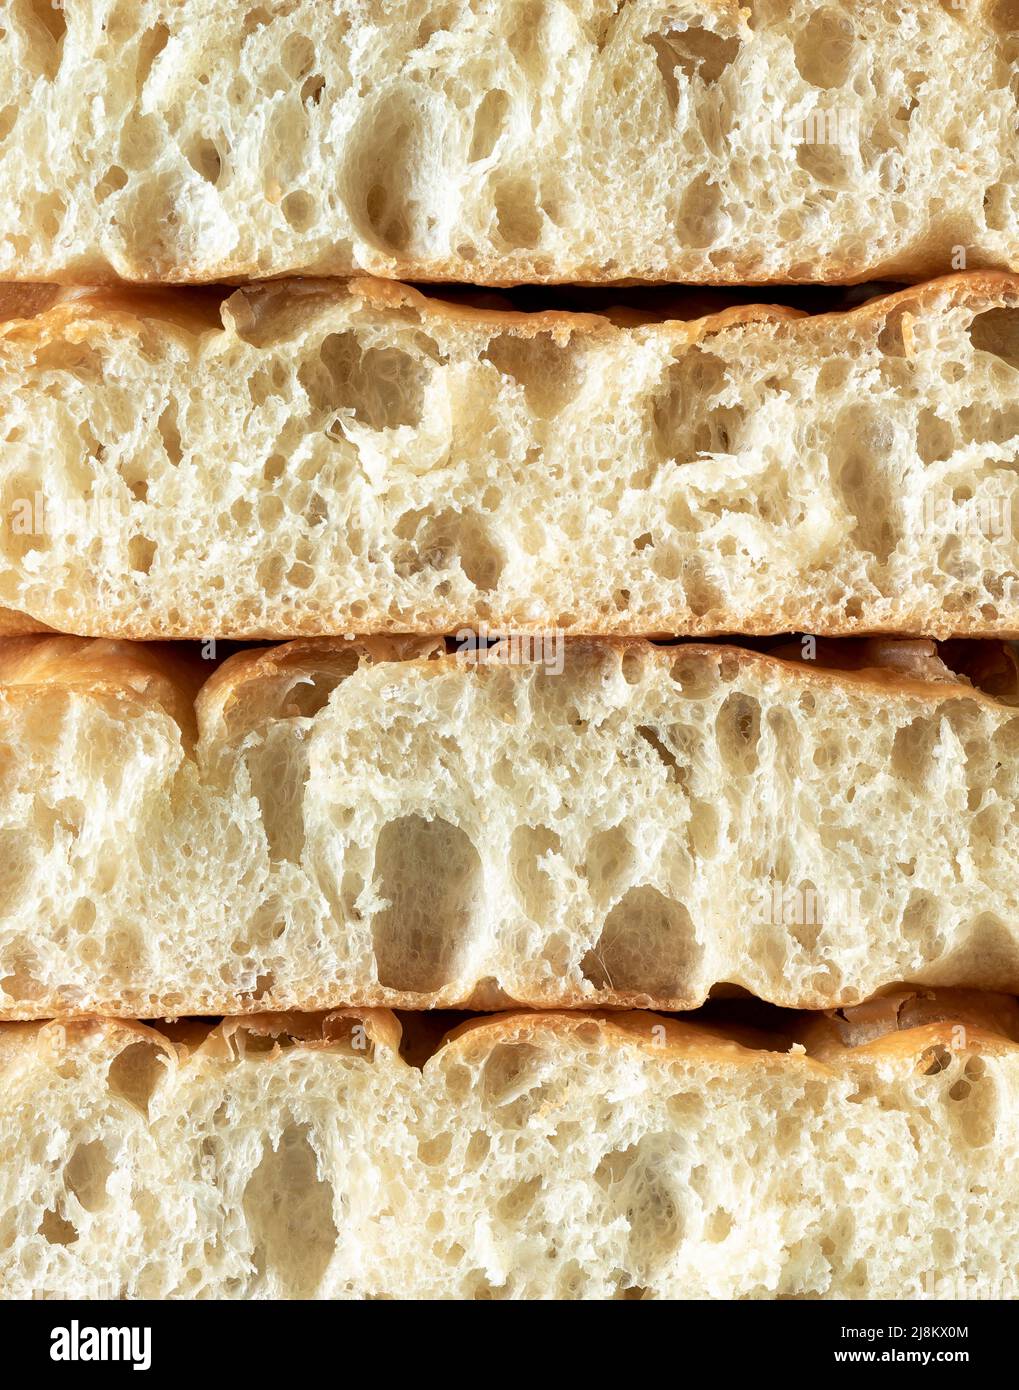 Close-up with slices of focaccia bread made with sourdough. Full-frame background with slices of focaccia in a pile. Homemade focaccia with sourdough Stock Photo